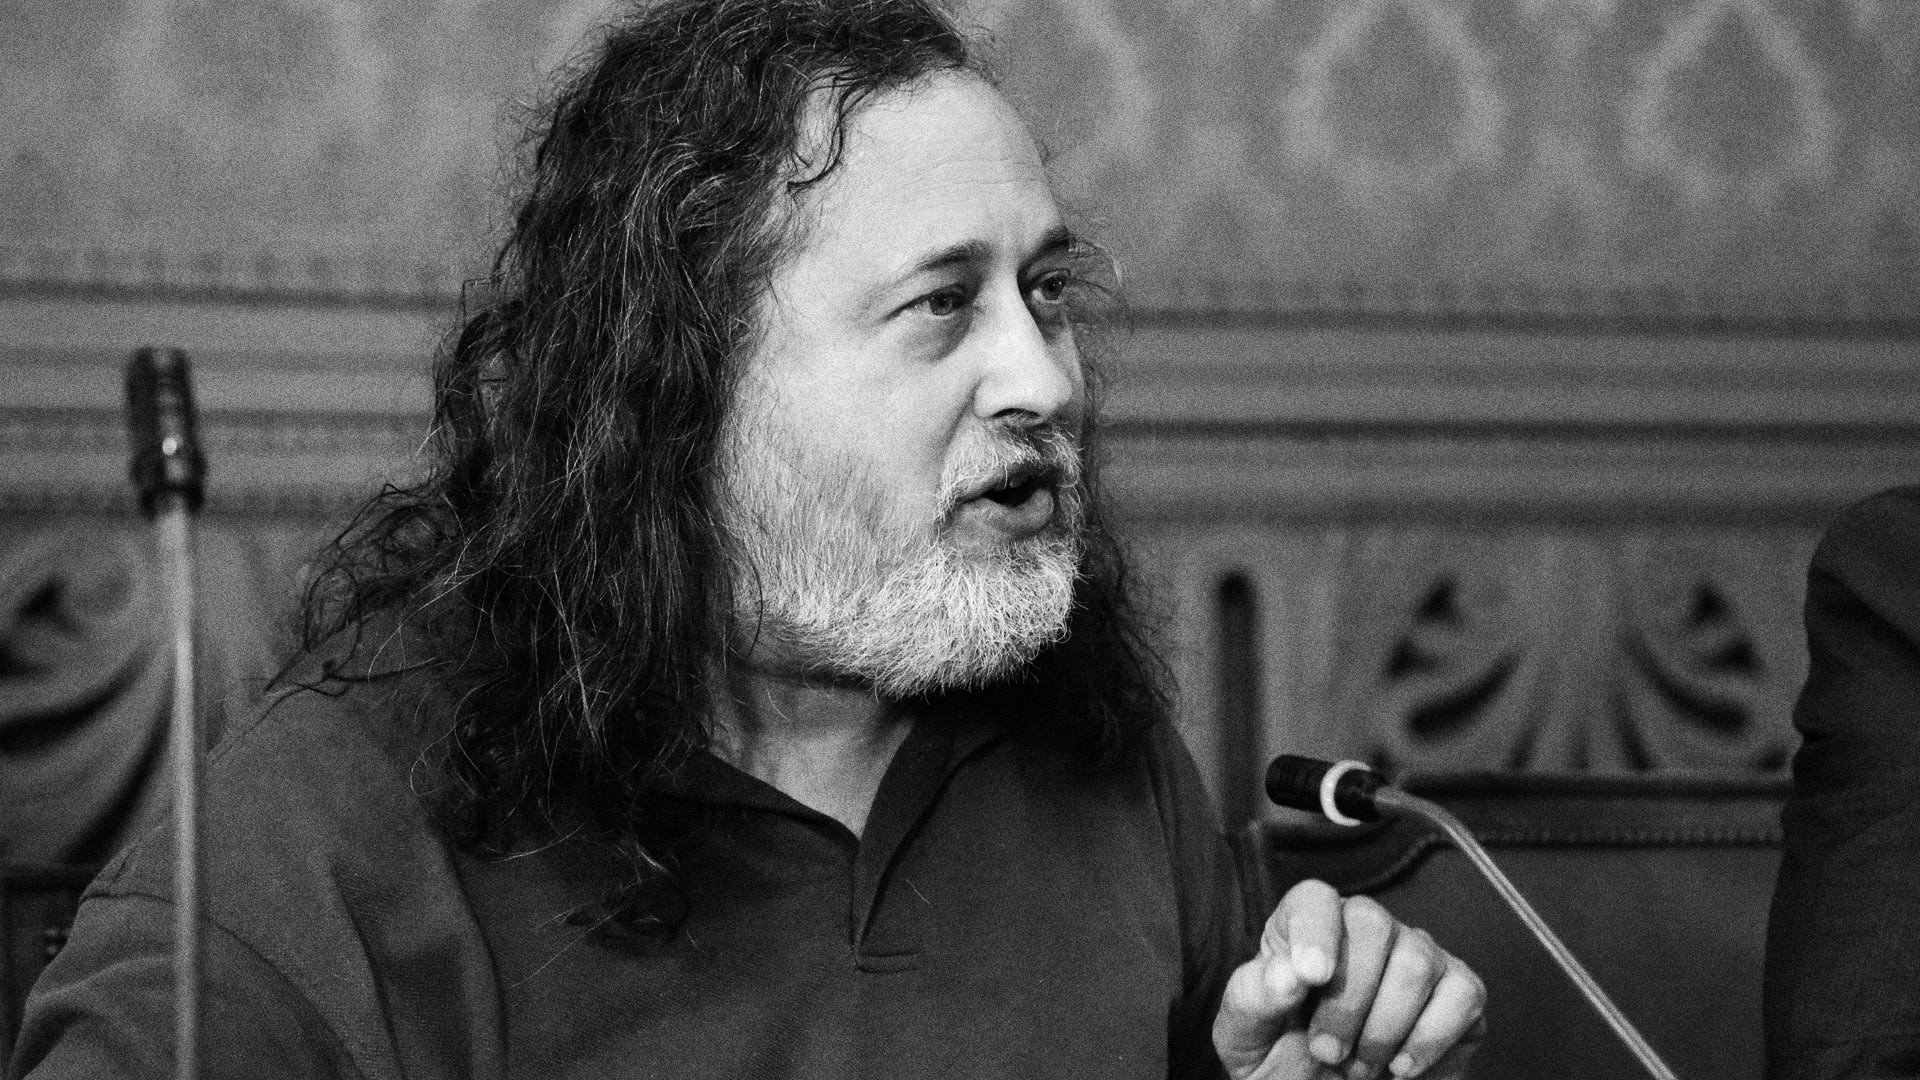 Mozilla and Tor join calls to oust Richard Stallman from Free Software Foundation